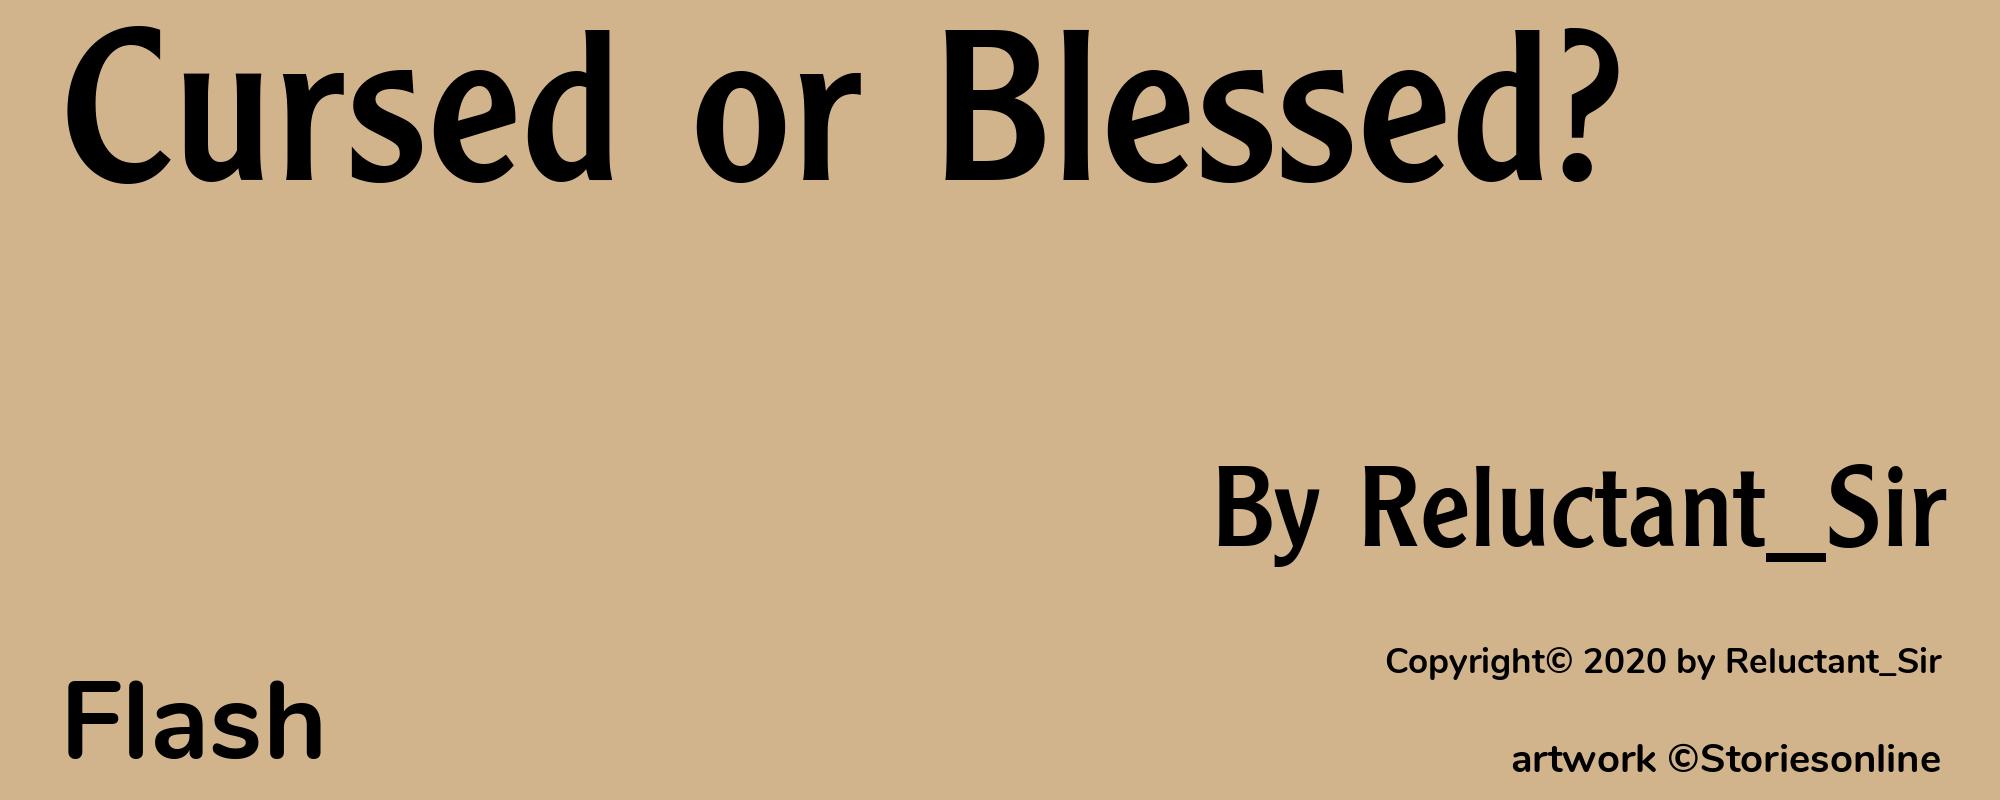 Cursed or Blessed? - Cover